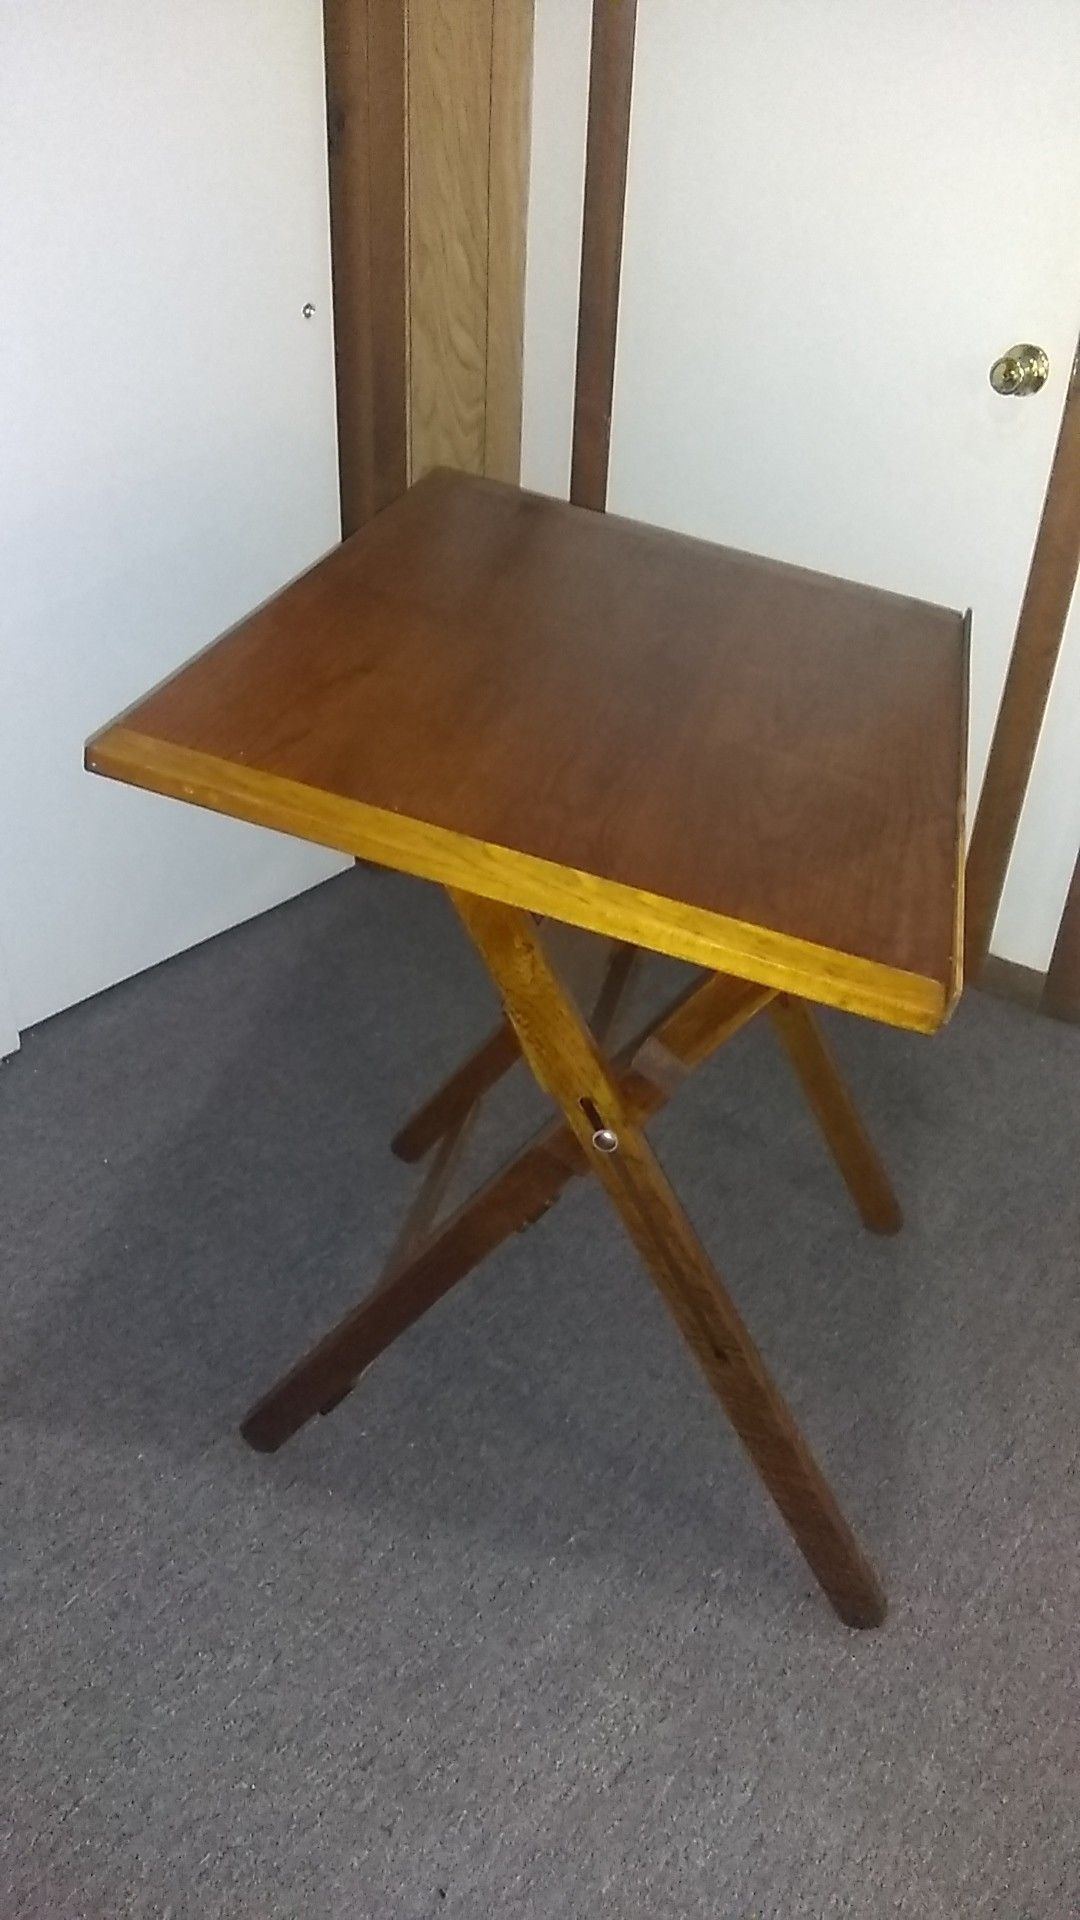 Antique red oak drafting table